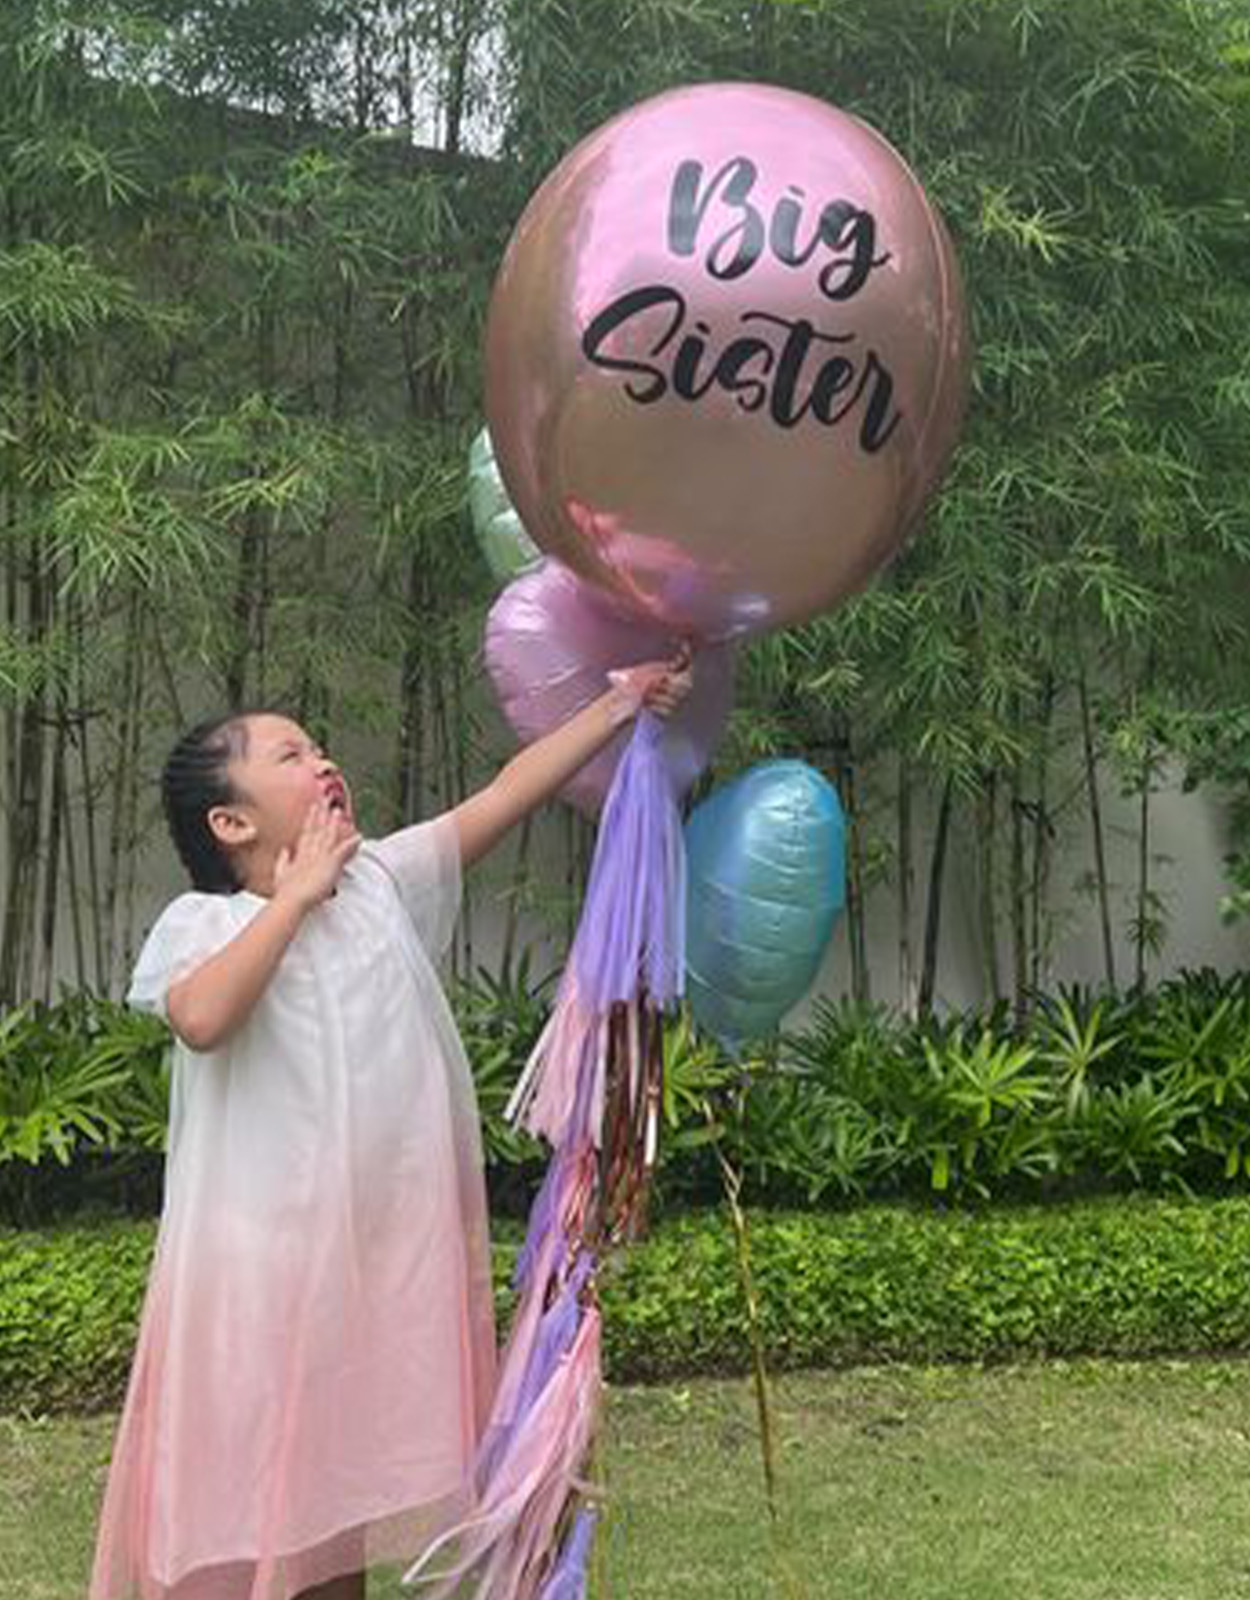 Pauleen Sotto's daughter Tali